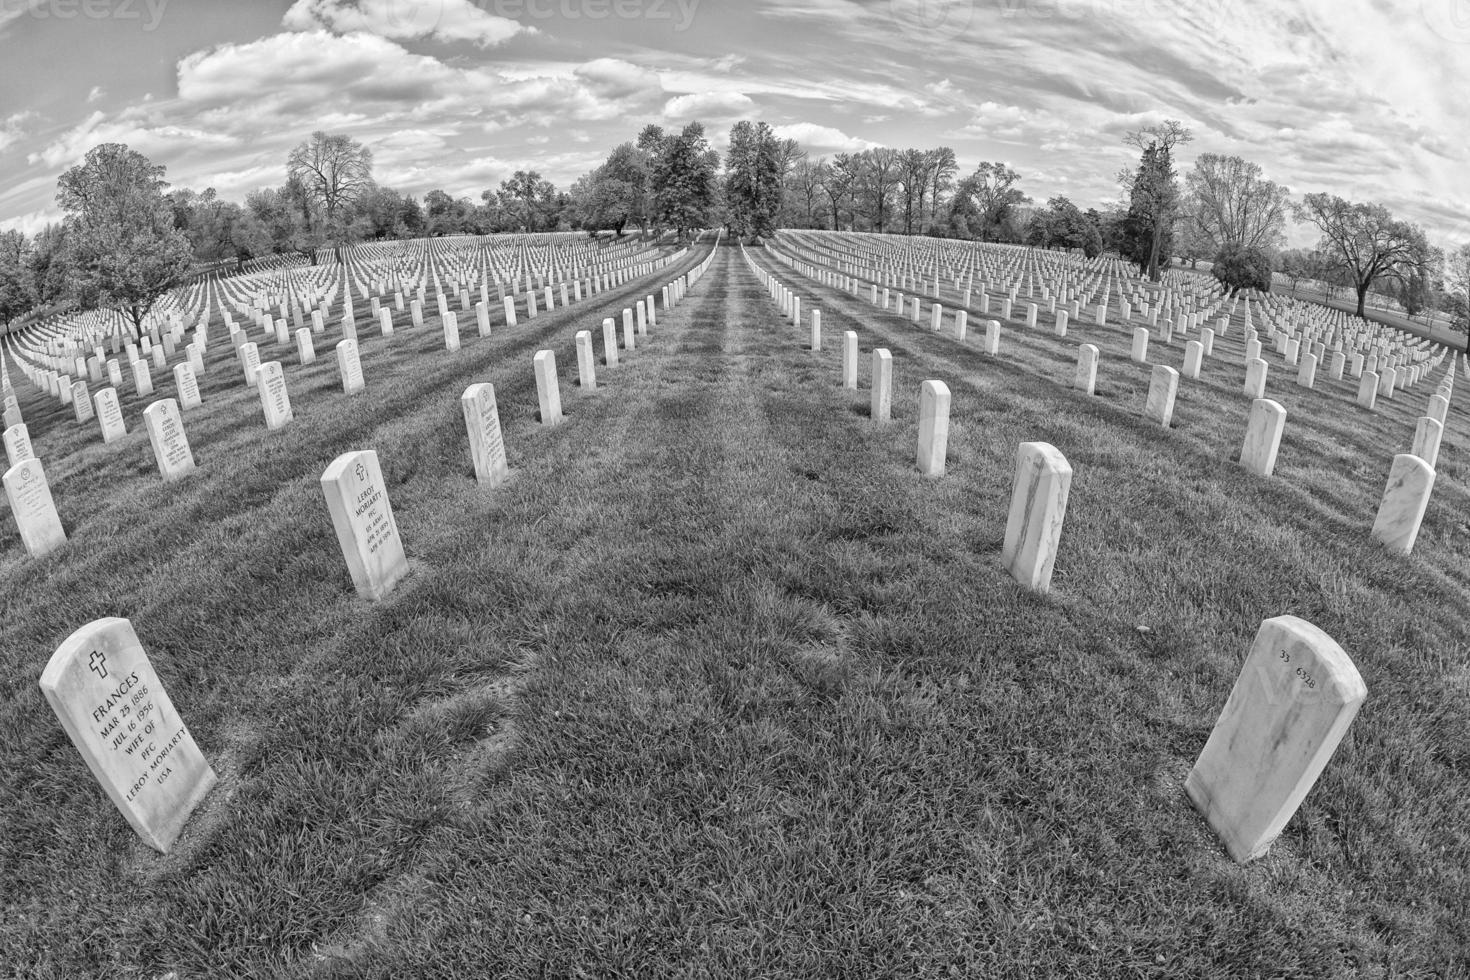 arlington cemetery graveyard in black and white photo